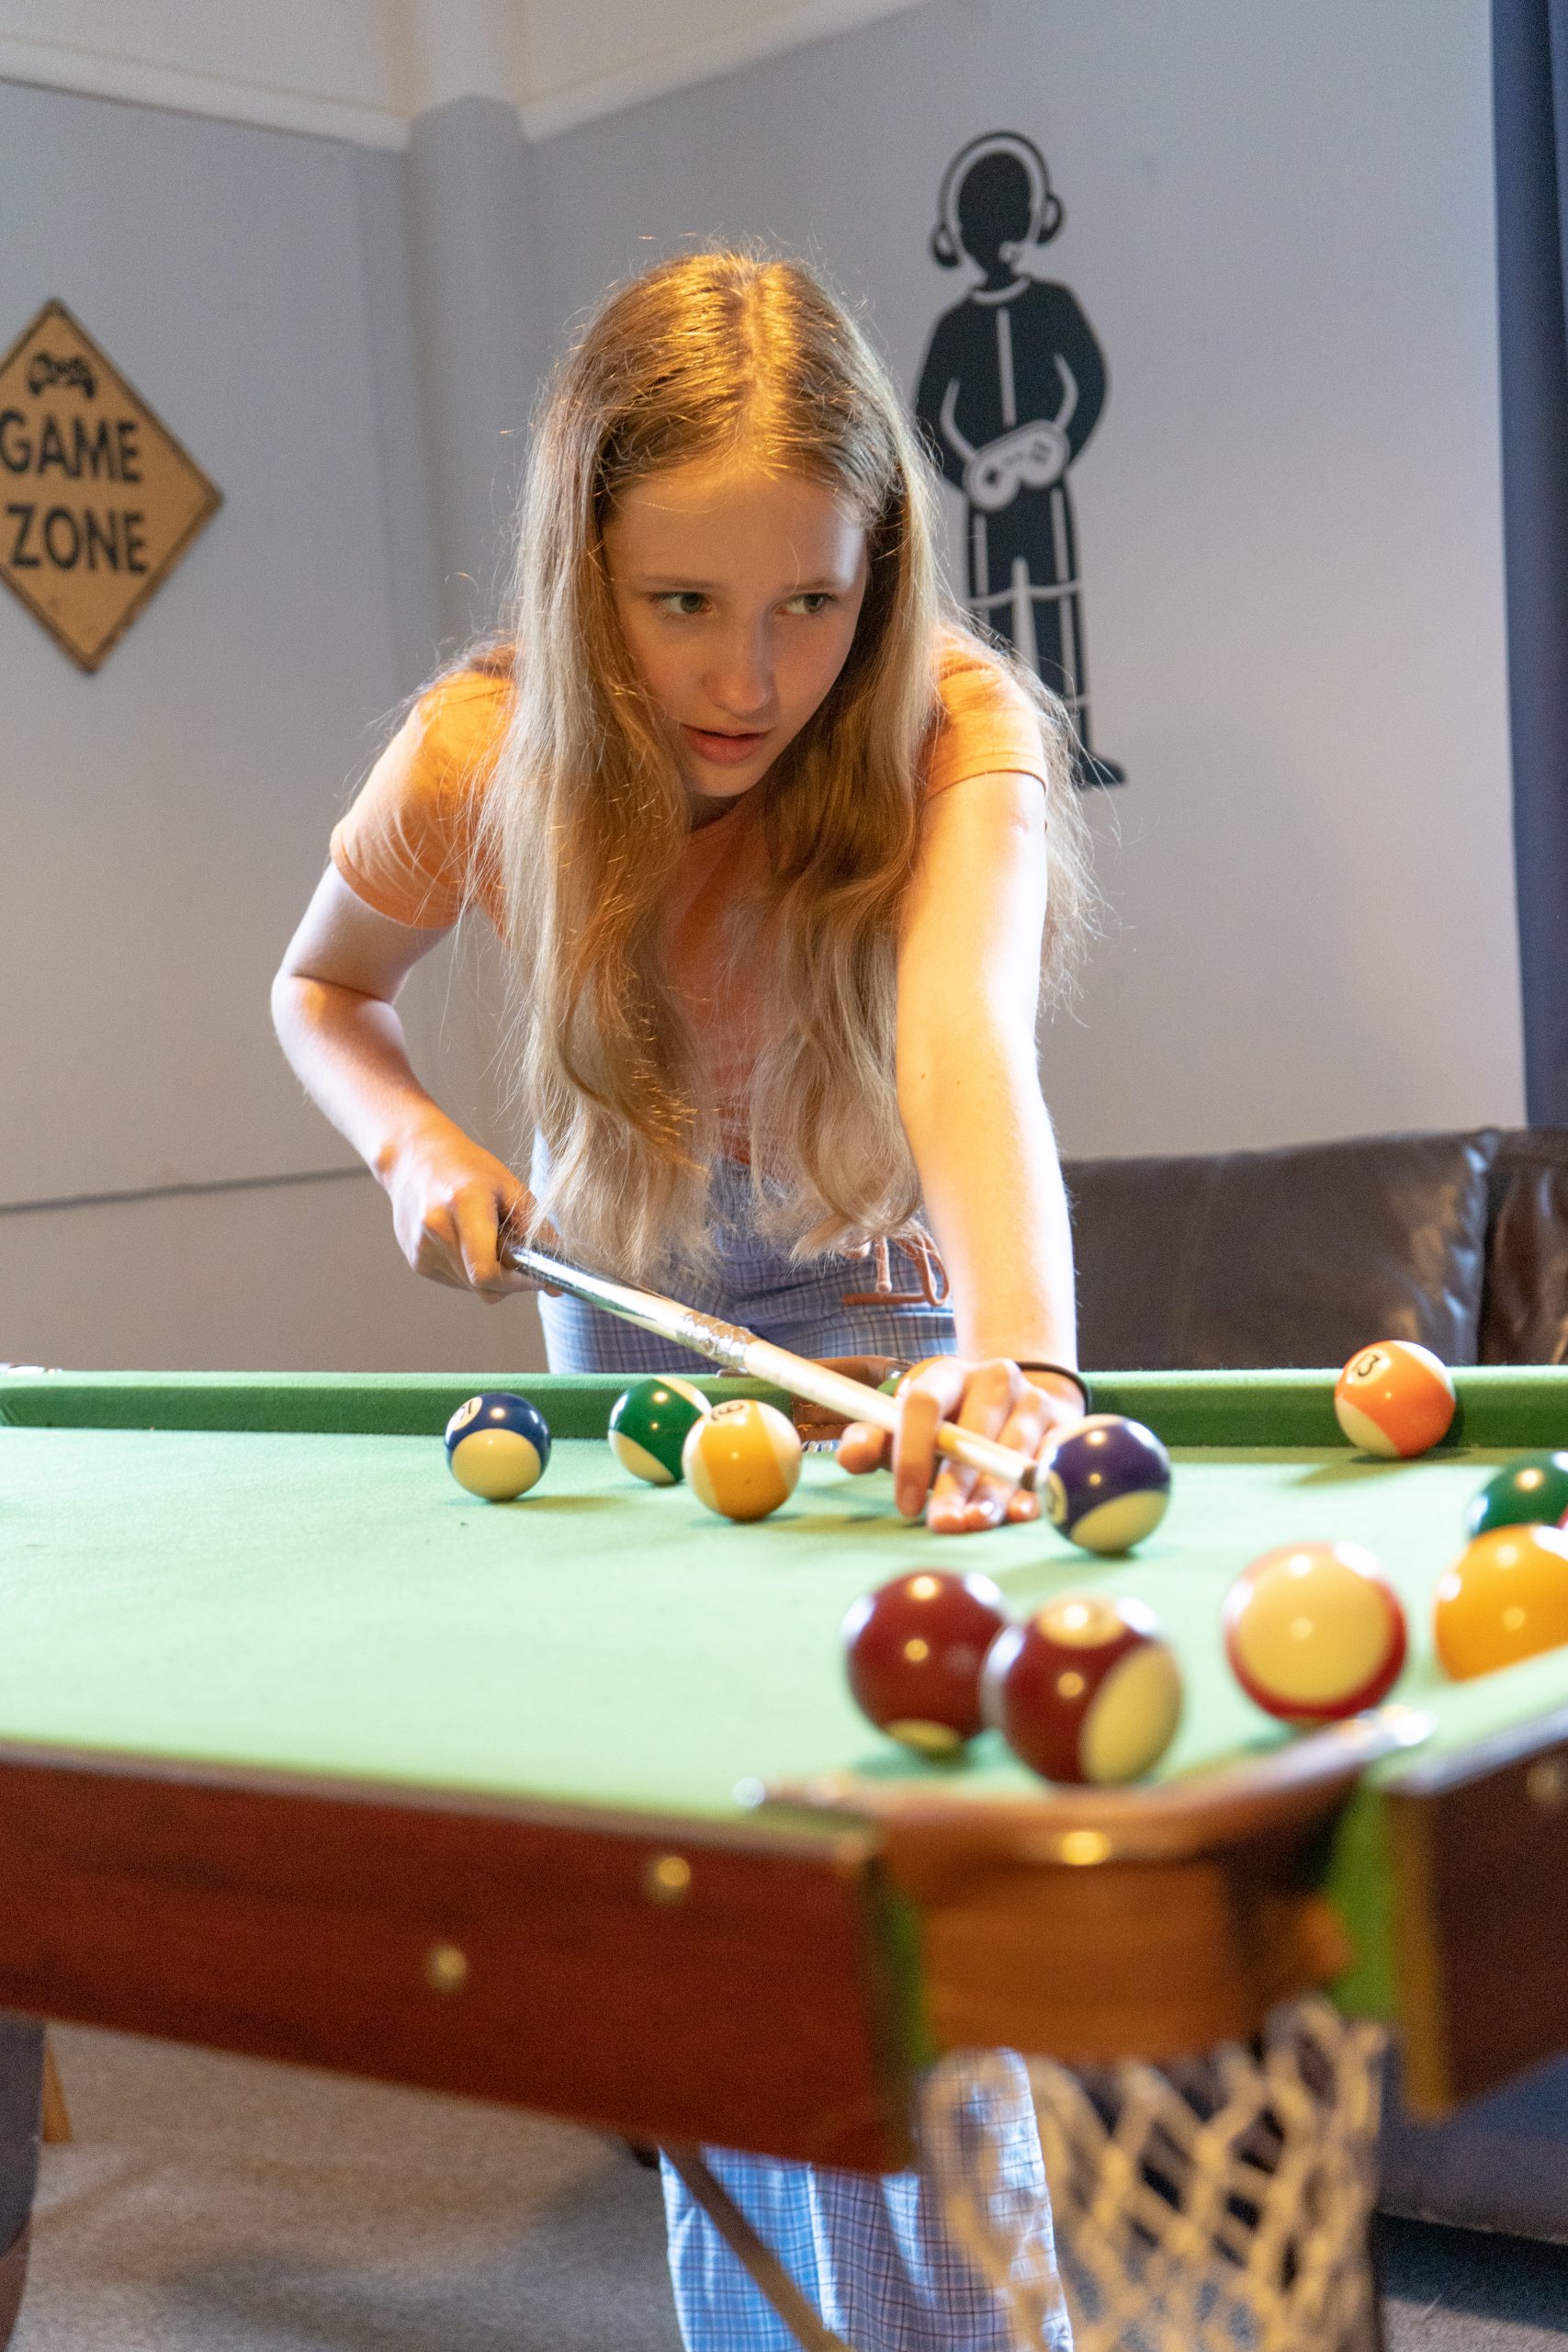 A Rookwood School boarding student is playing pool in the evening in the boarding accommodation.